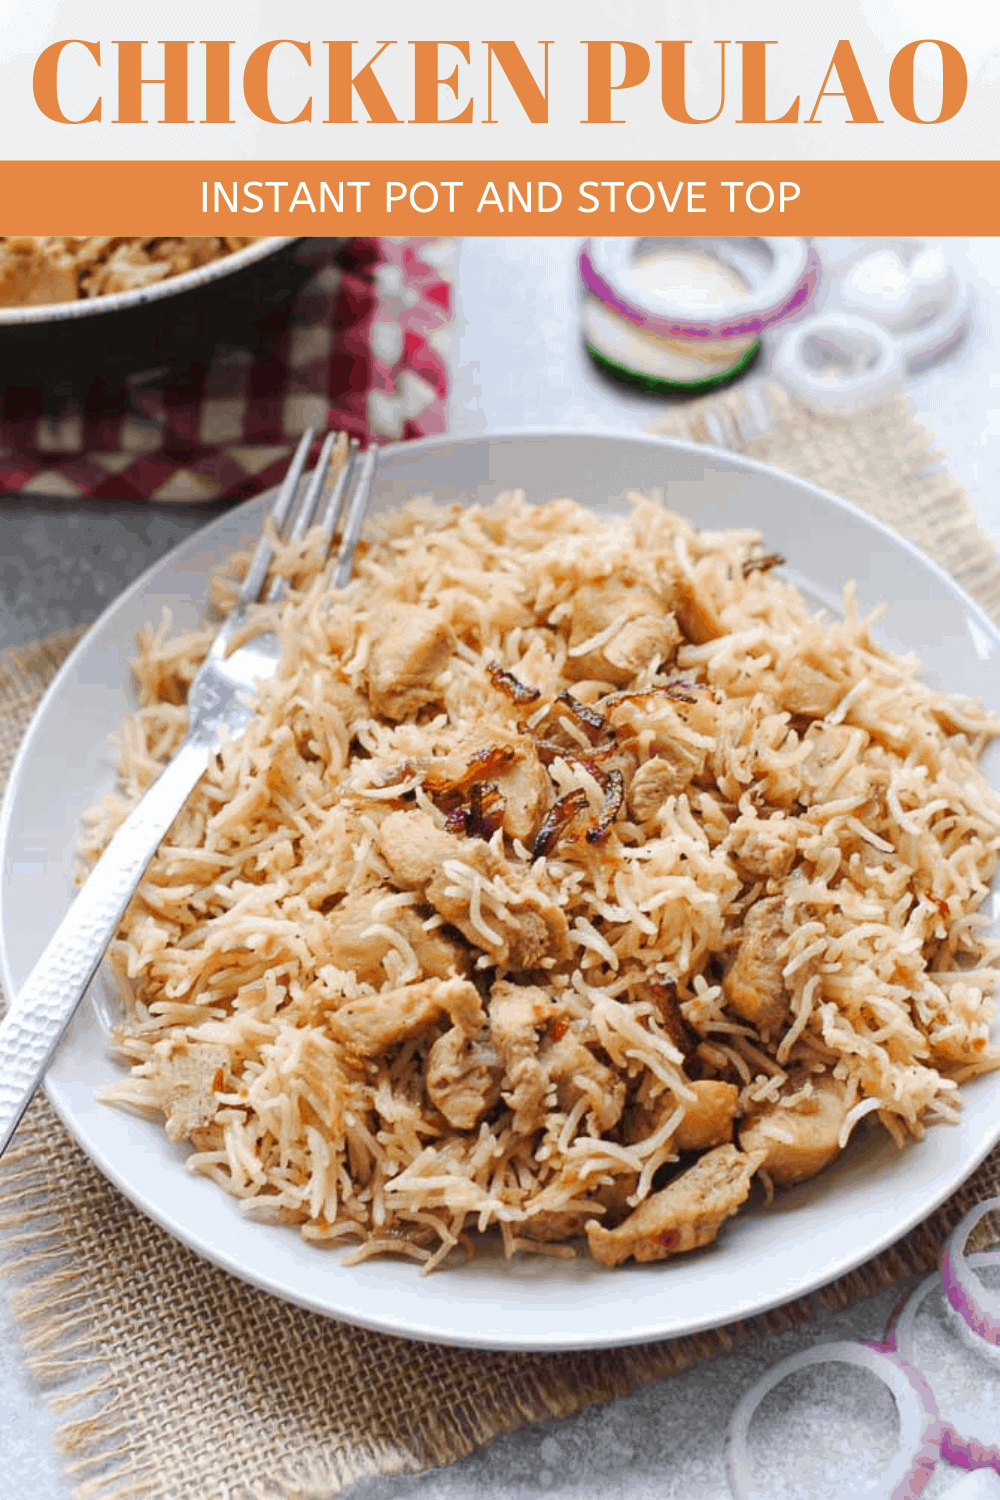 Easy Chicken Pulao: Instant Pot and Stovetop | Indian Ambrosia